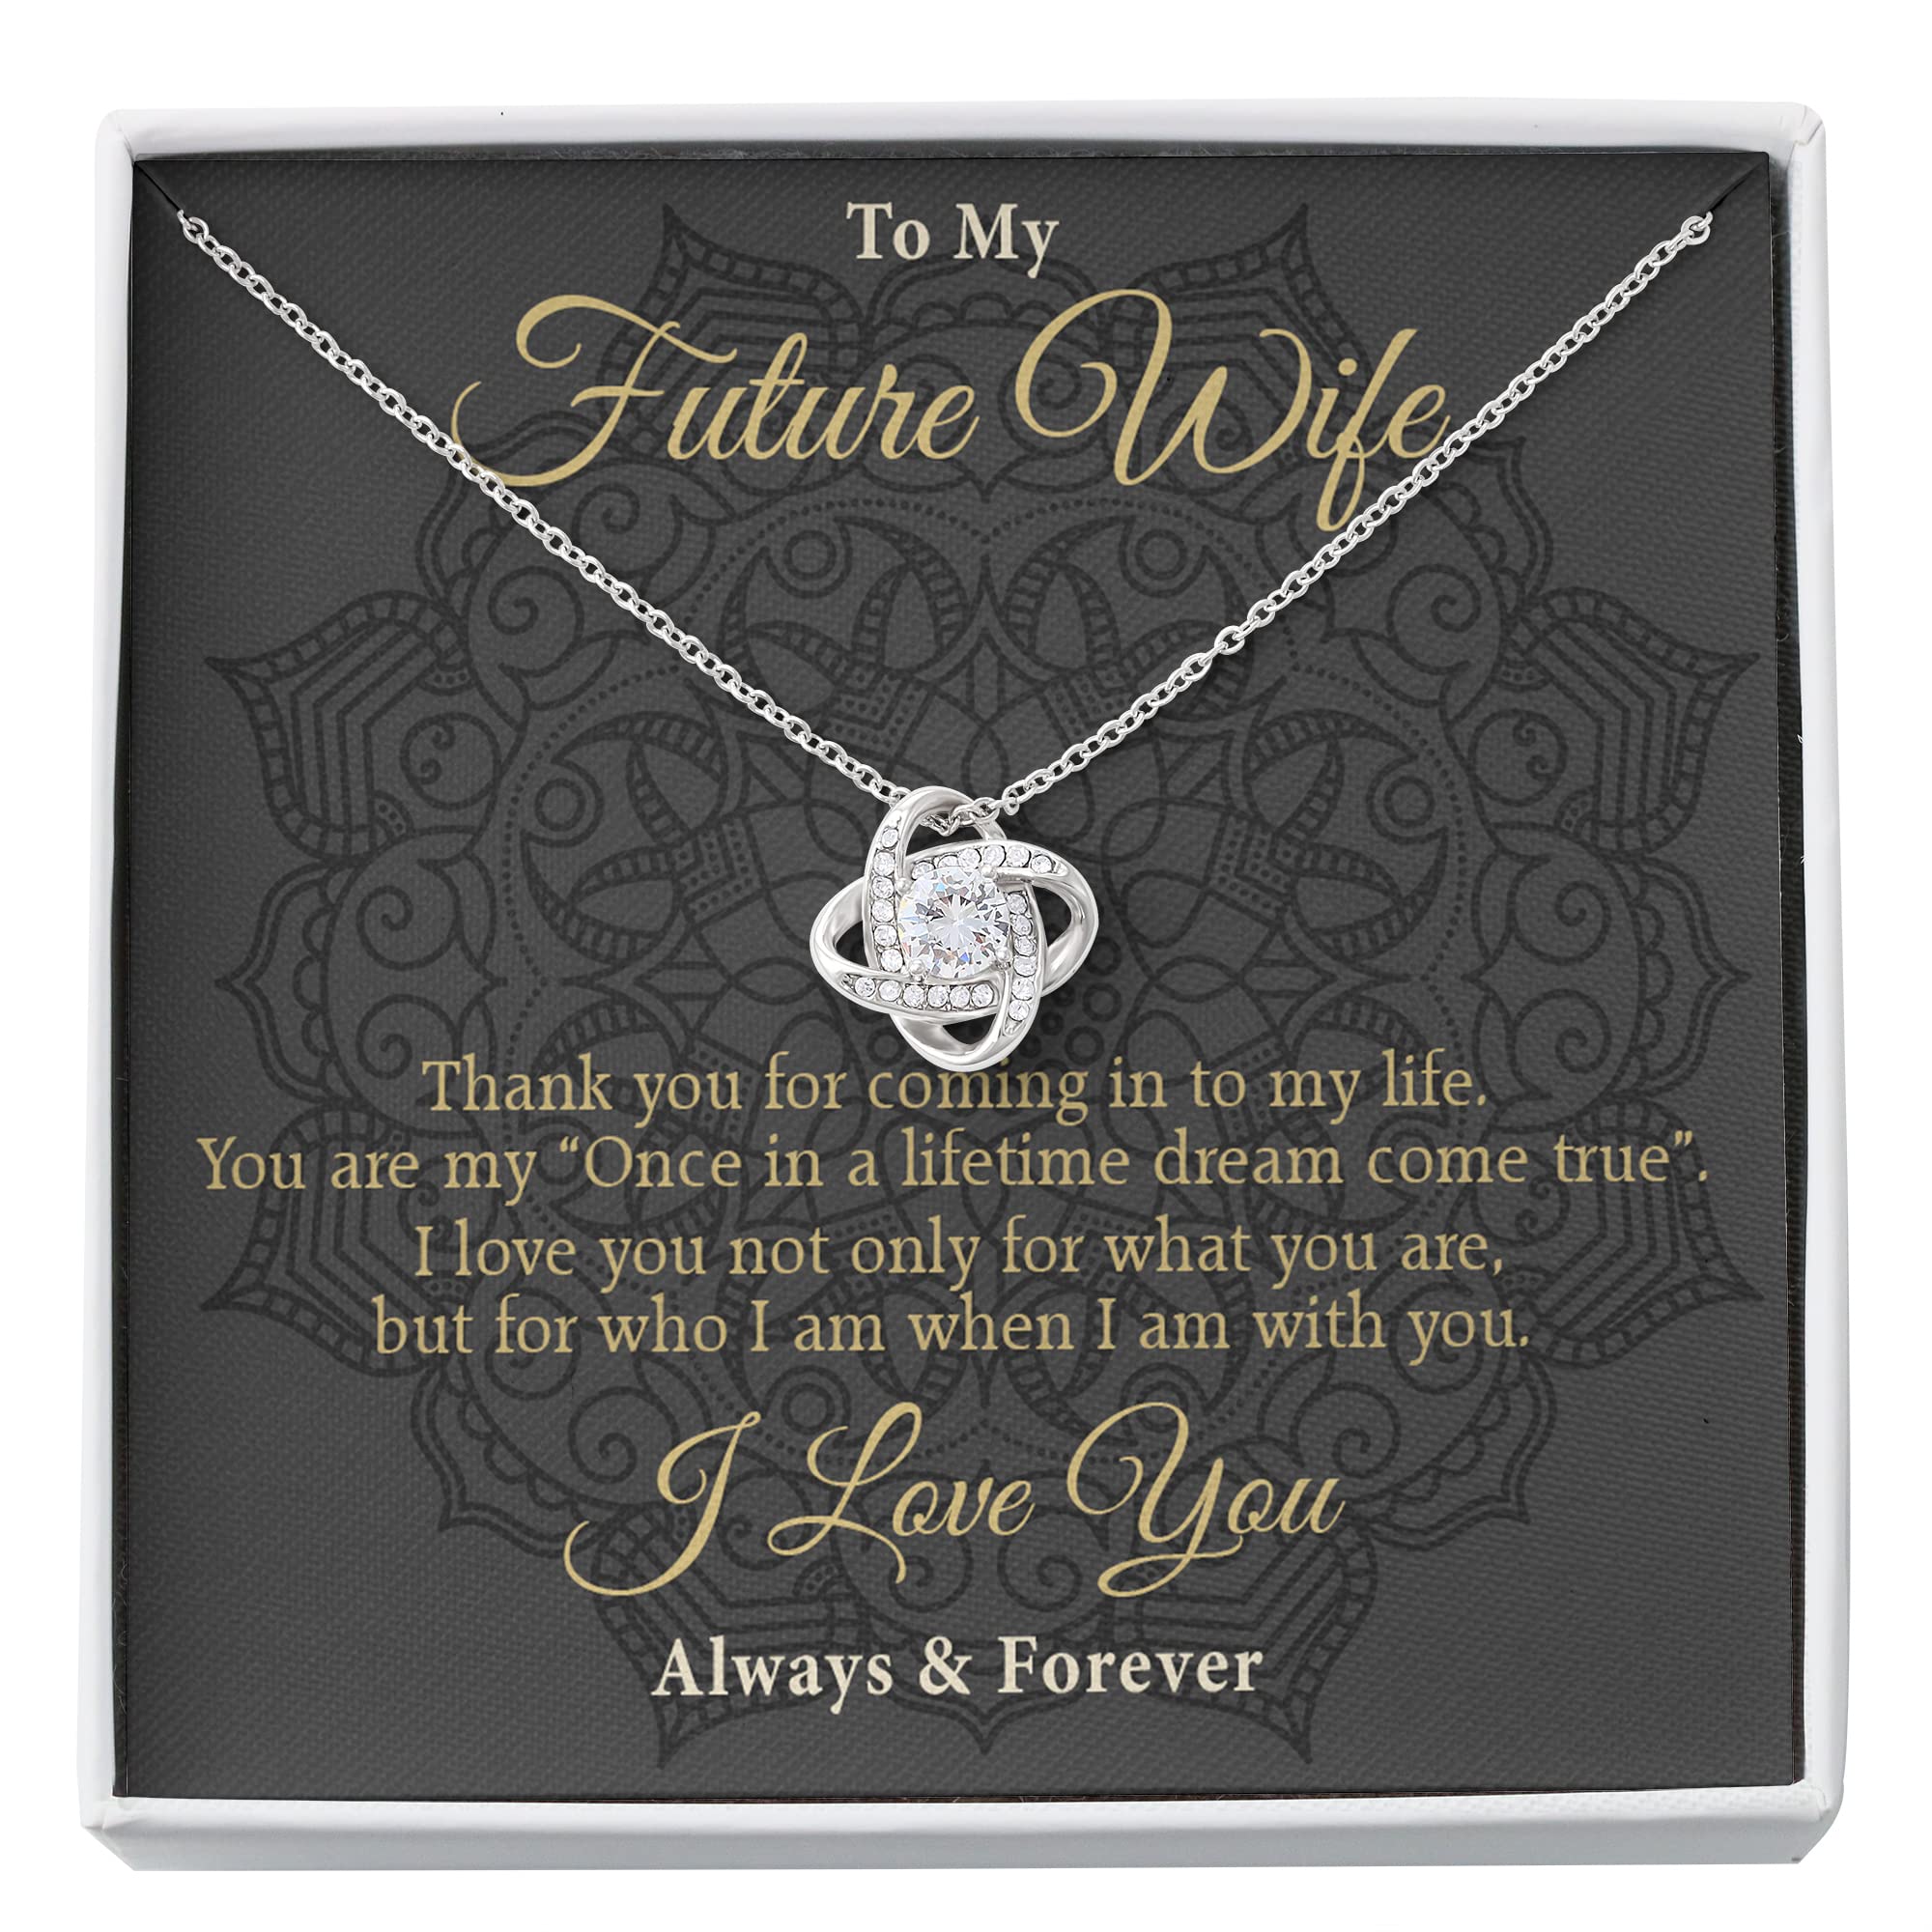 Generic Fiance Gift For Her, Fiance Birthday Gift For Her, Gift to Fiance on Engagement, Future Wife Necklace Gift for Valentine's, Birthday, Anniversary